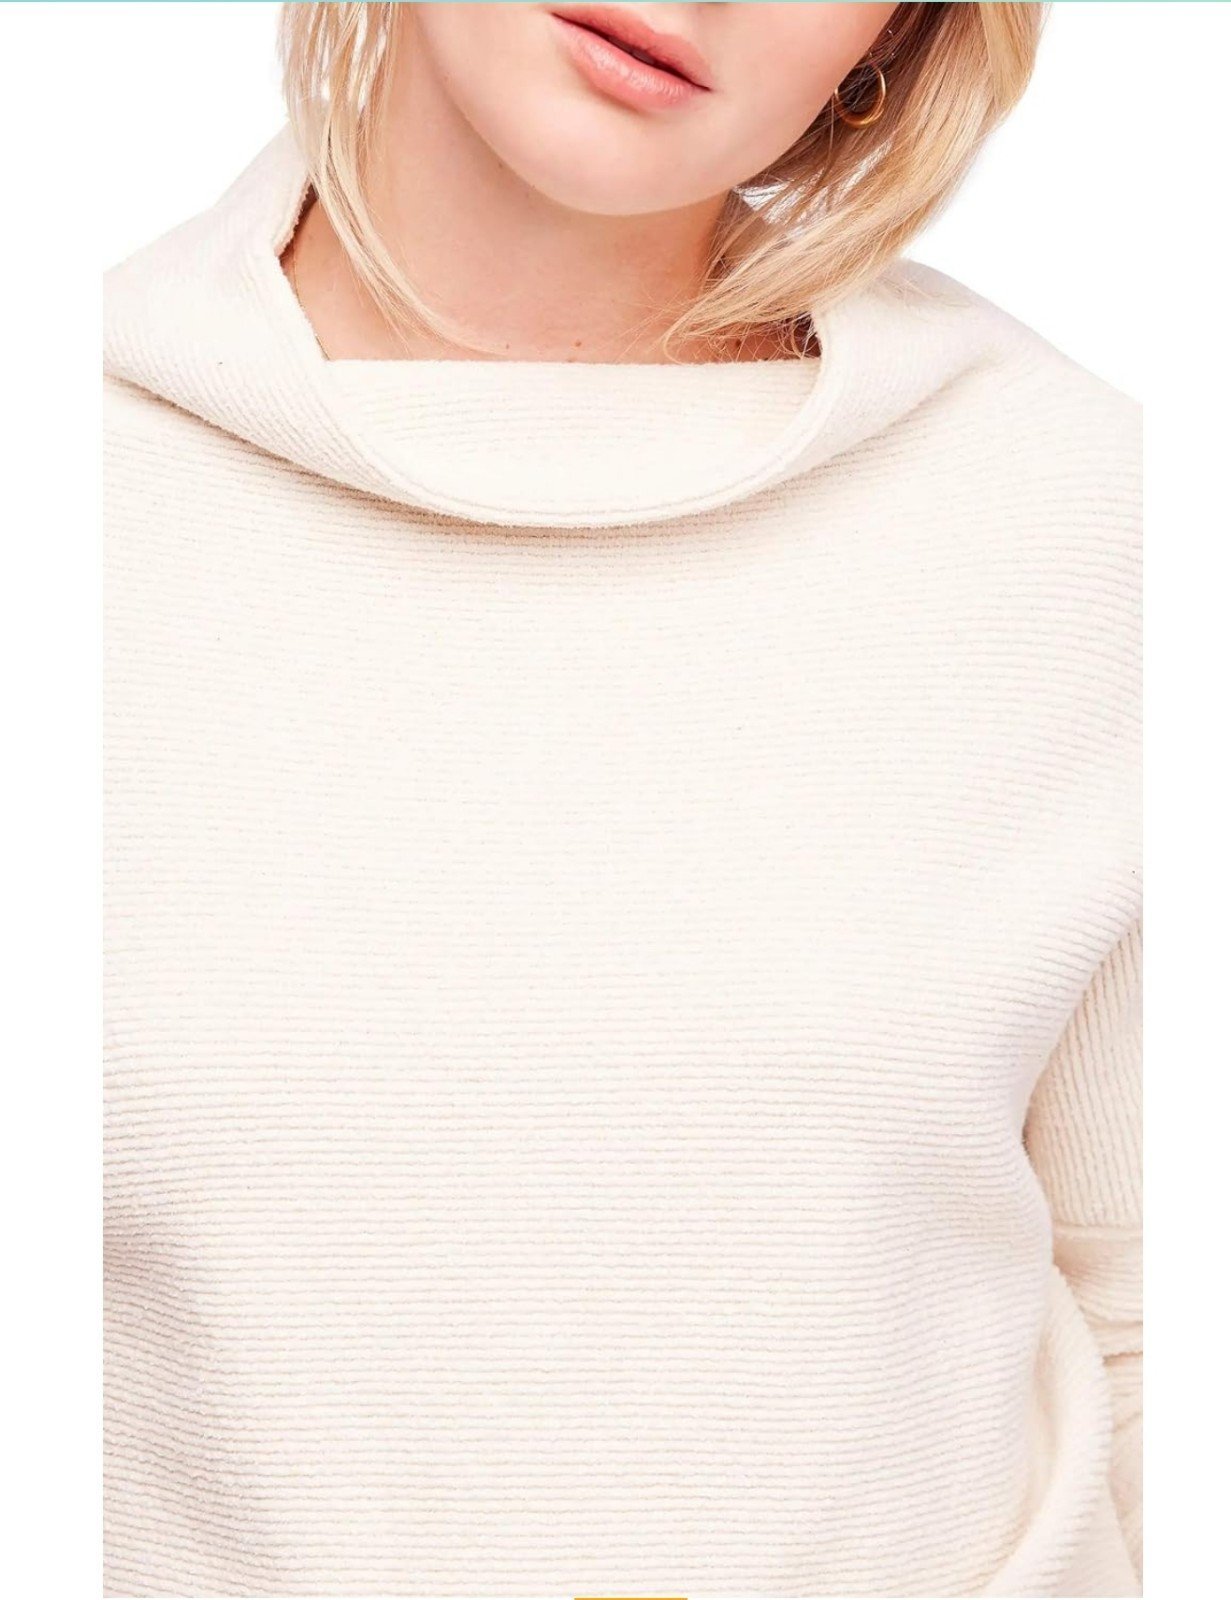 Affordable Free People Women´s Ottoman Slouchy Sweater, Cream, White, XL fqhbSQIuy best sale